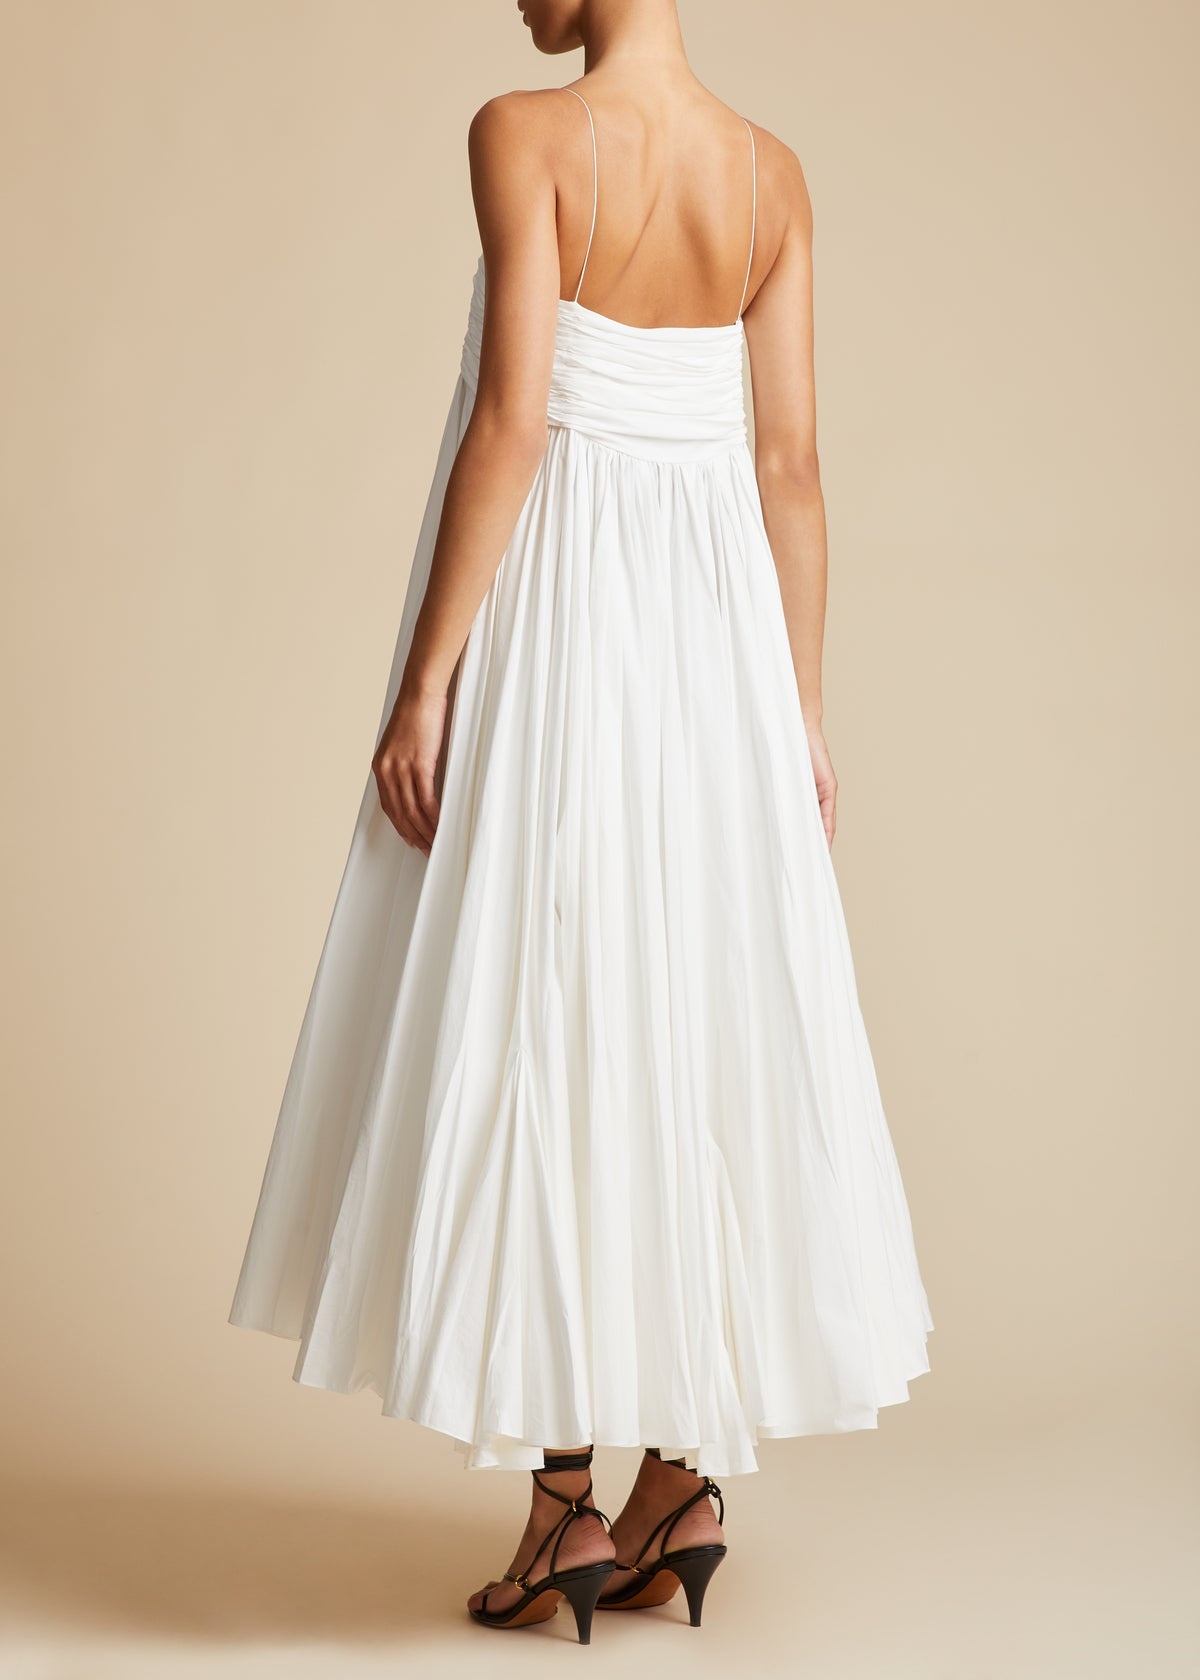 The Lally Dress in White - 3